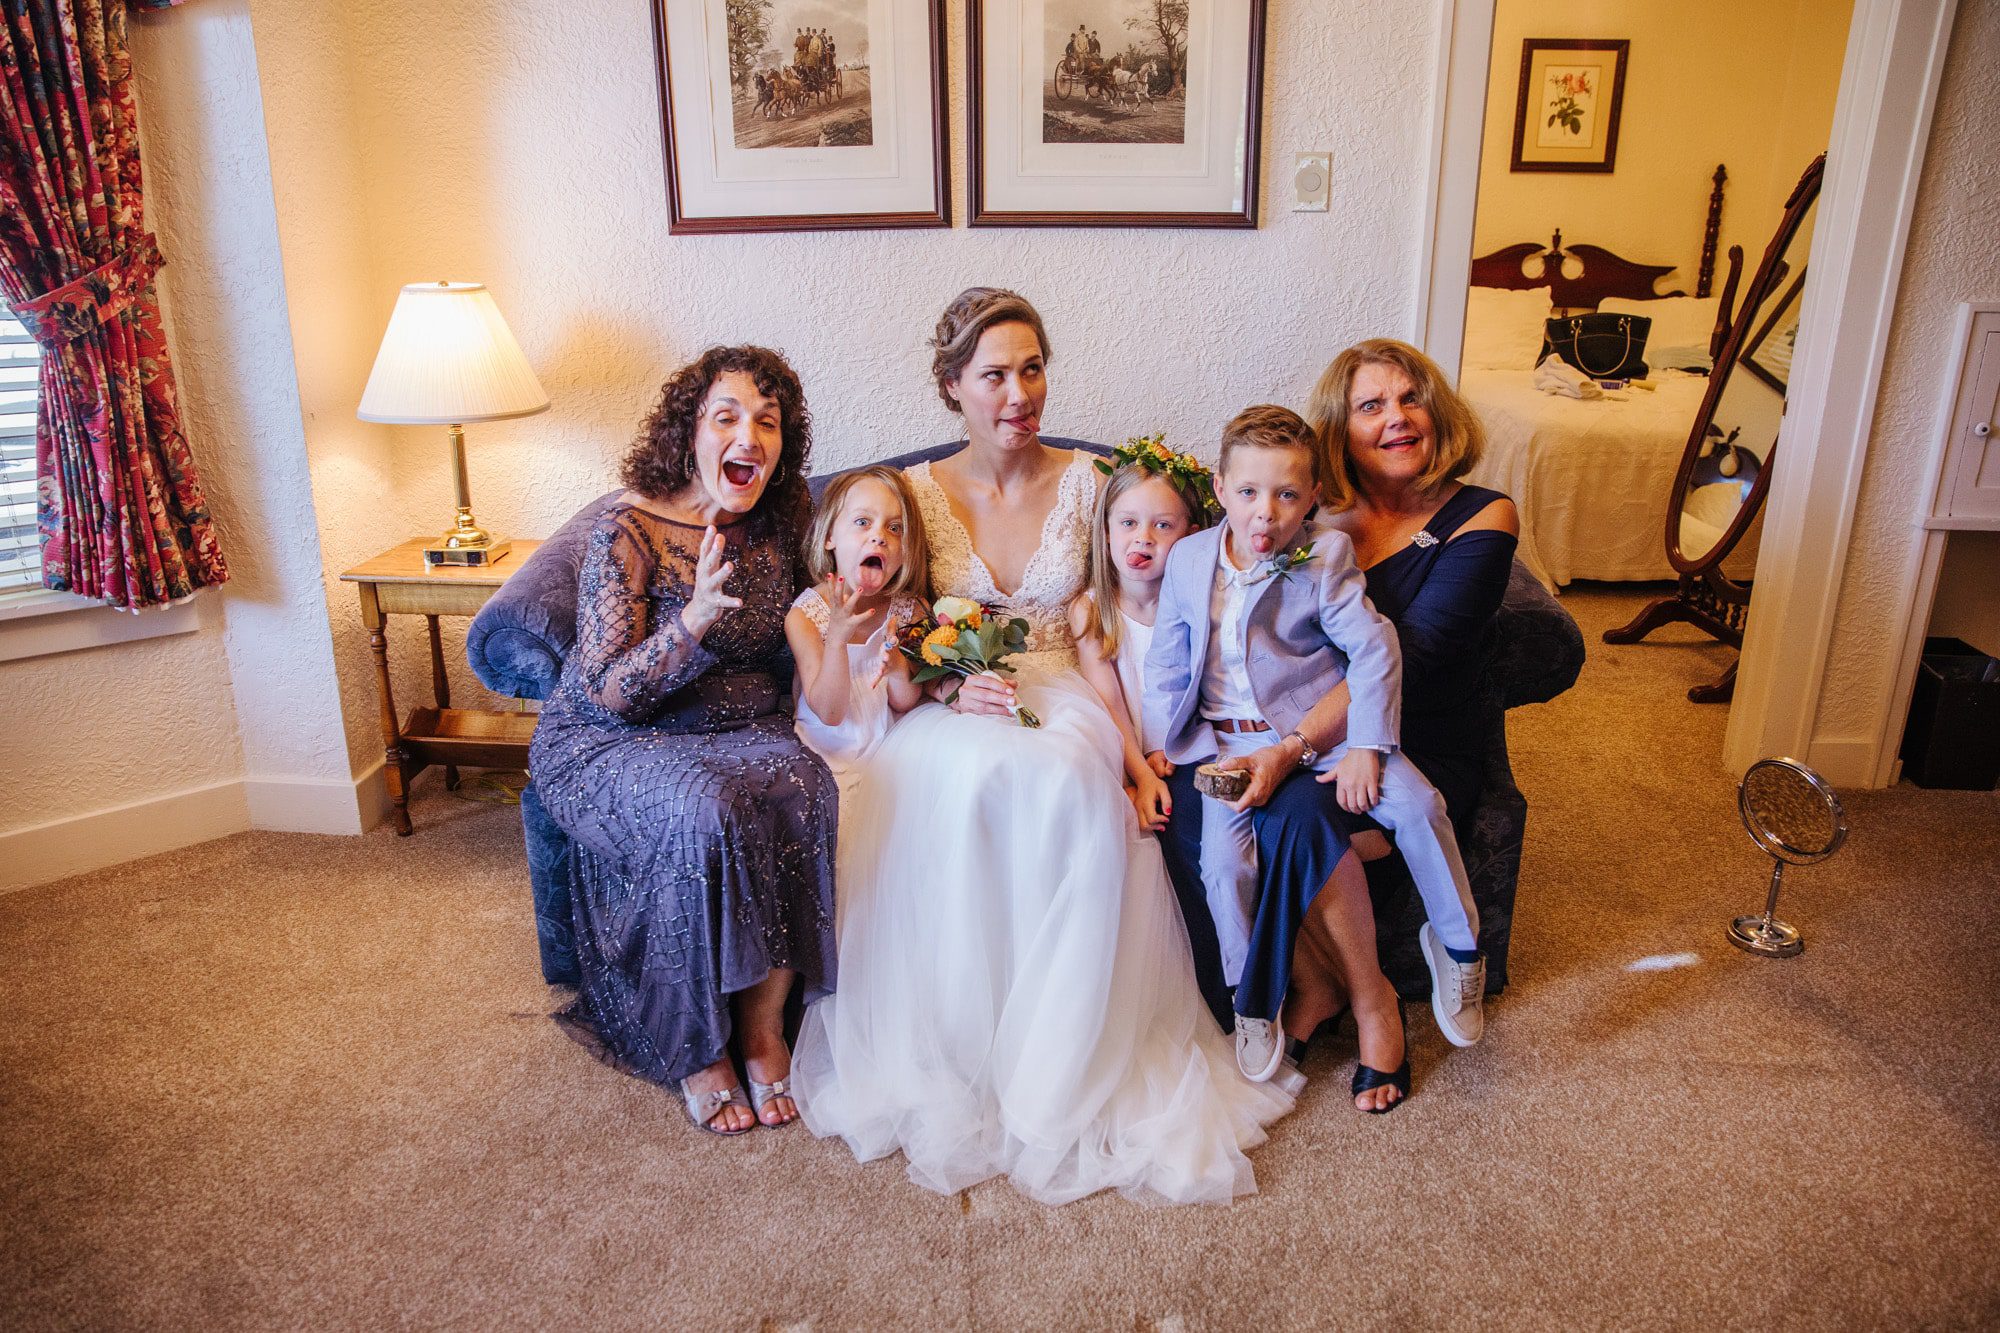 bride with family, bride with kids, silly face bride wedding